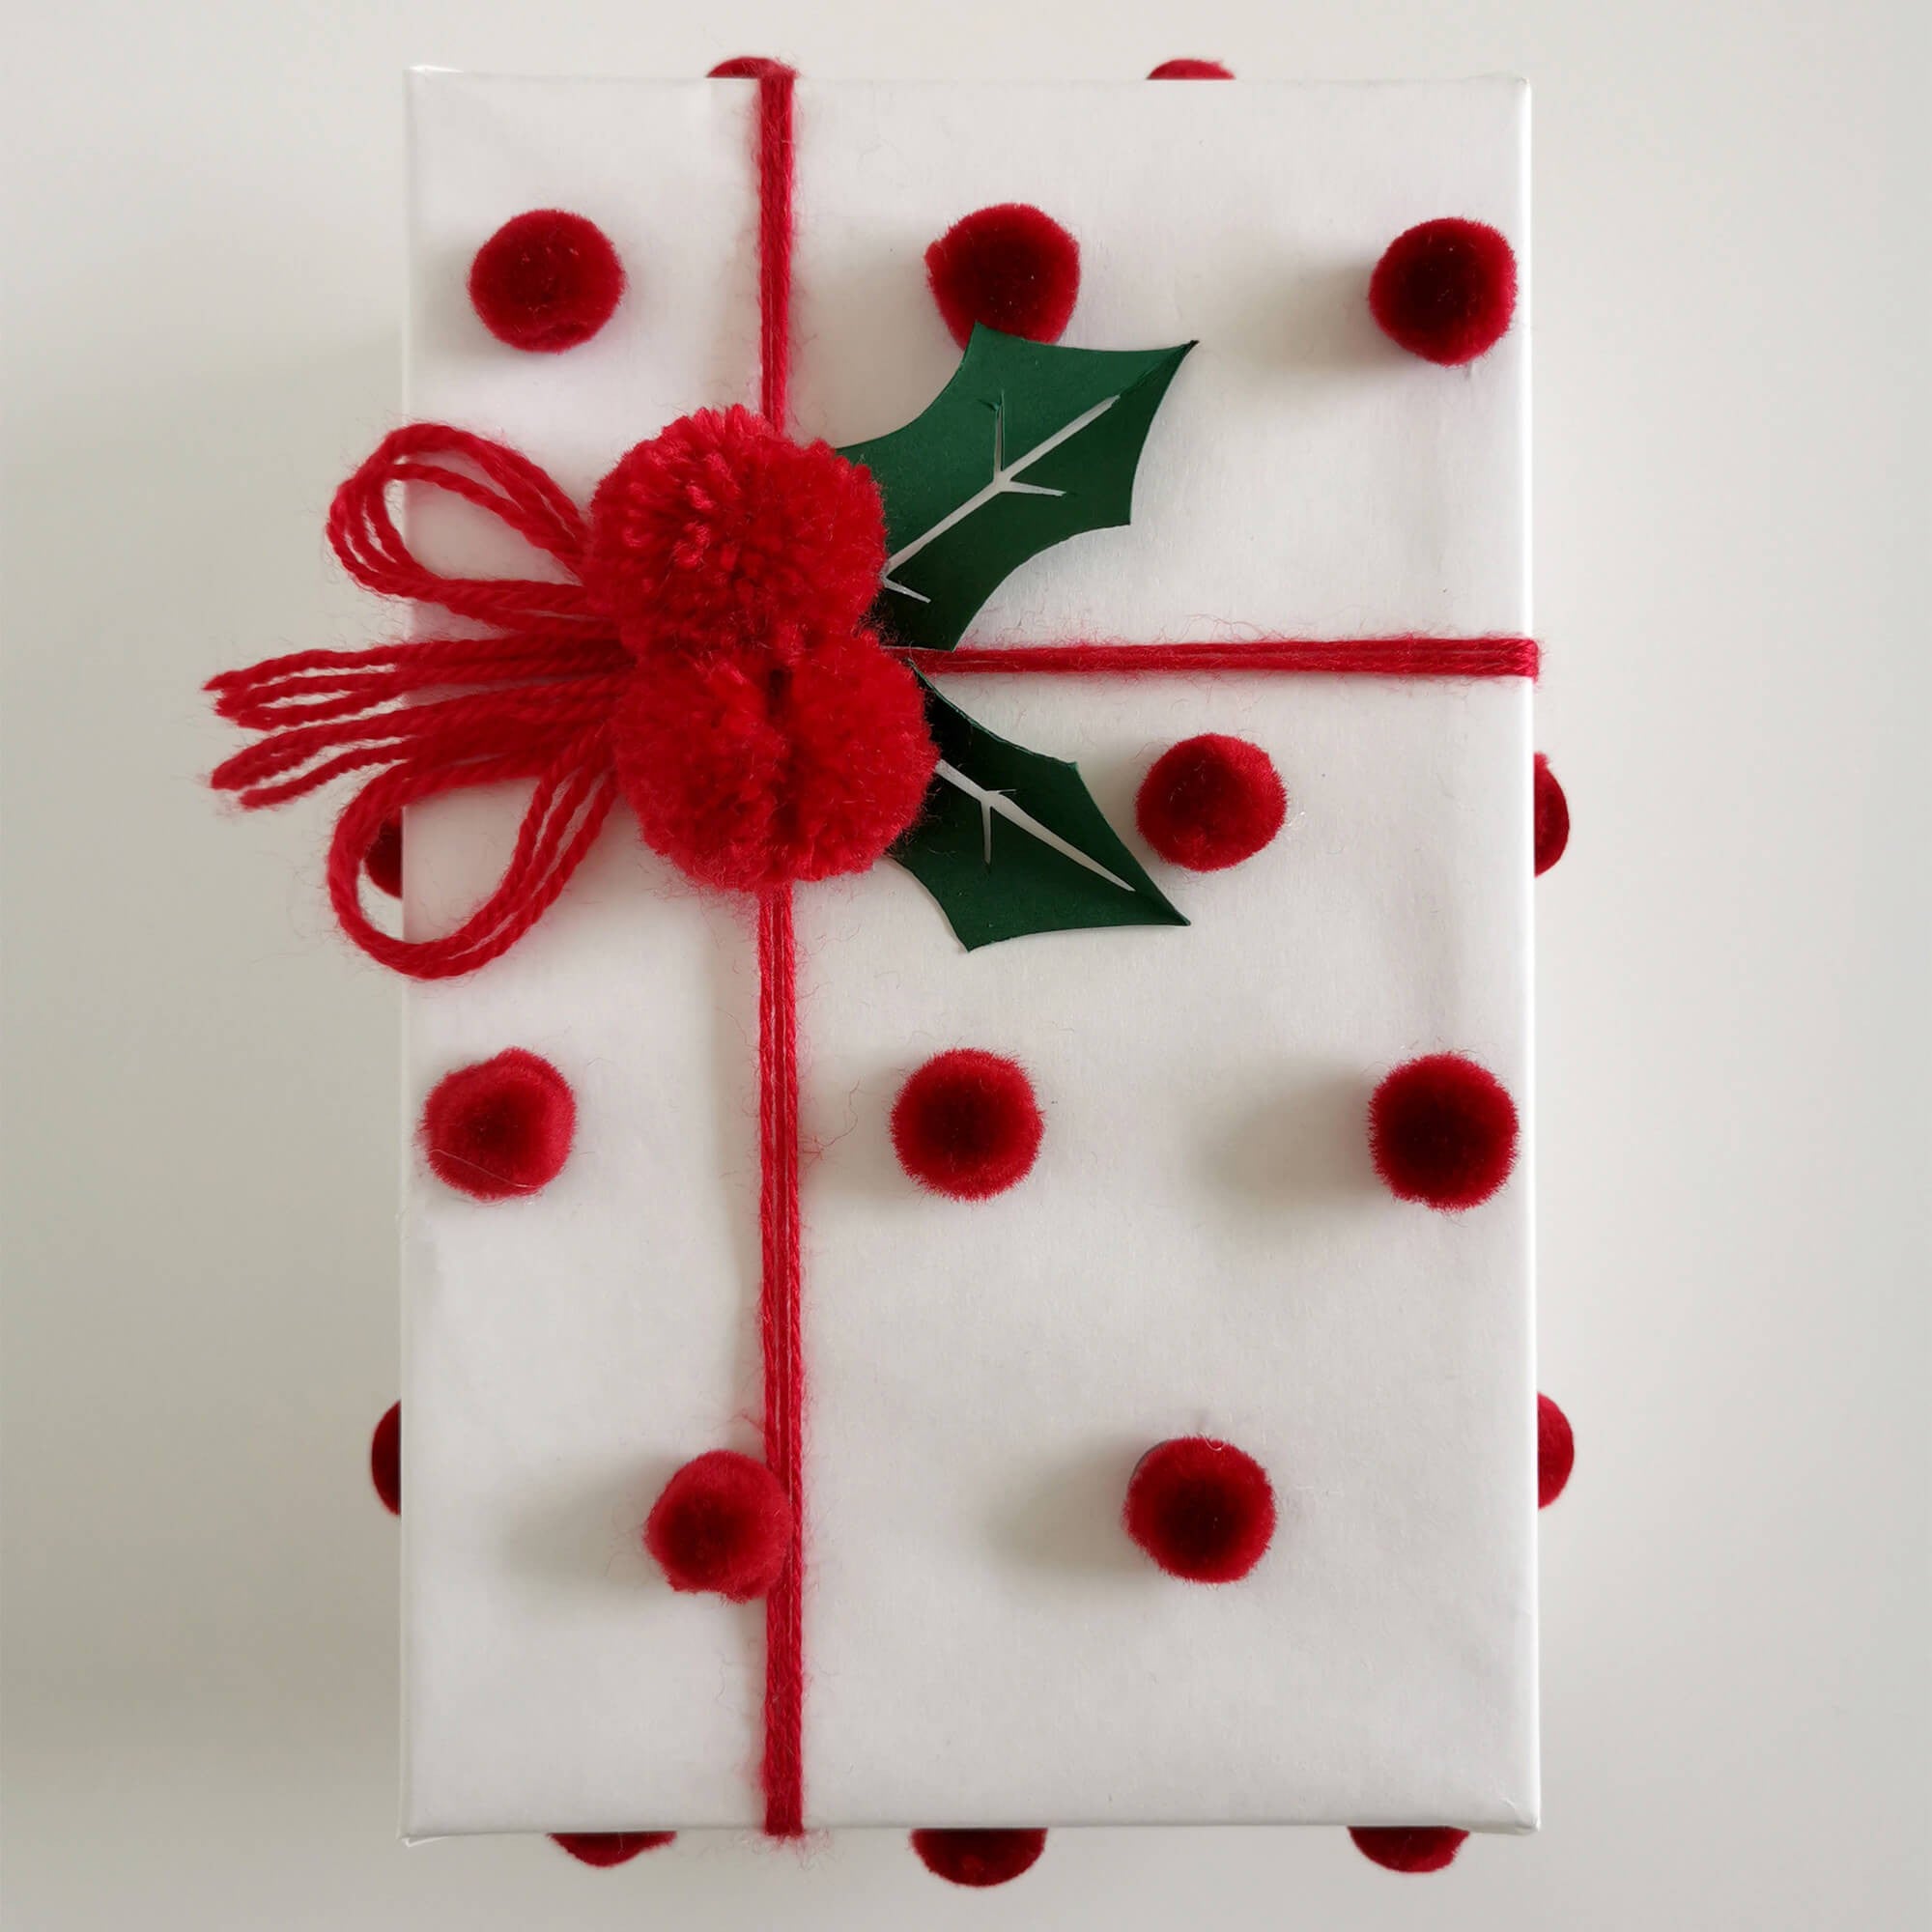 Creative Gift Wrapping with Pom Poms - The Make Your Own Zone